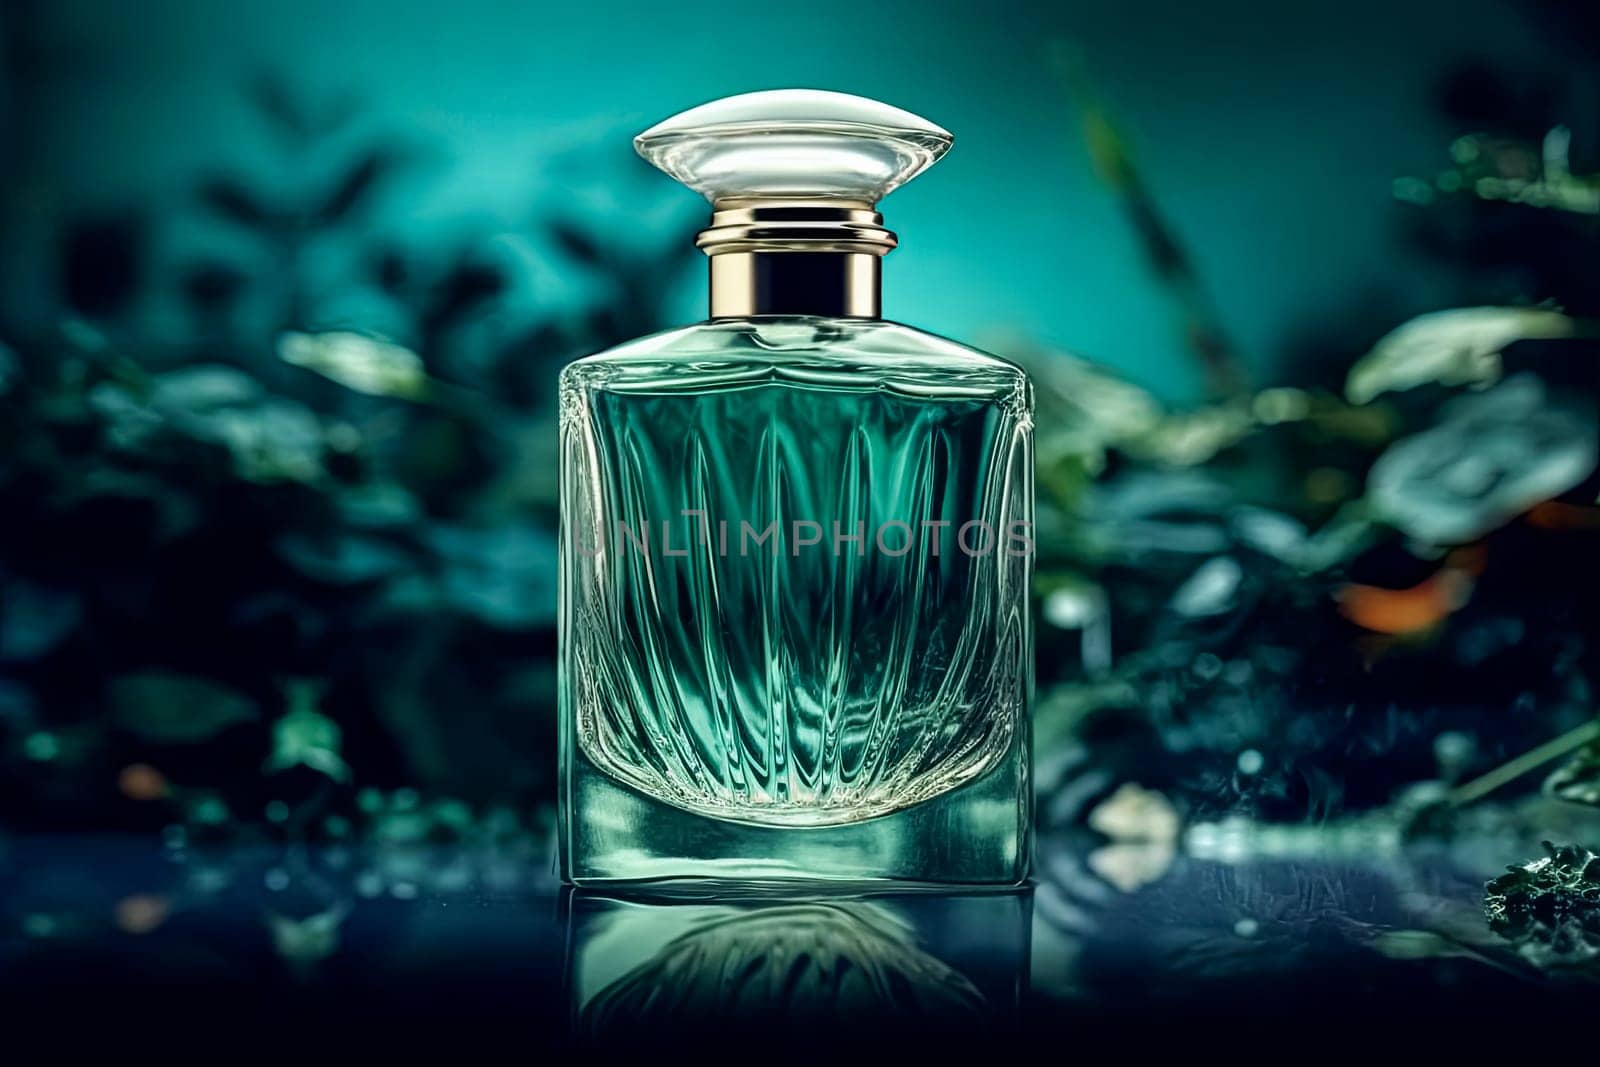 Luxury perfume with a golden insert on the bottle against a blurred background.